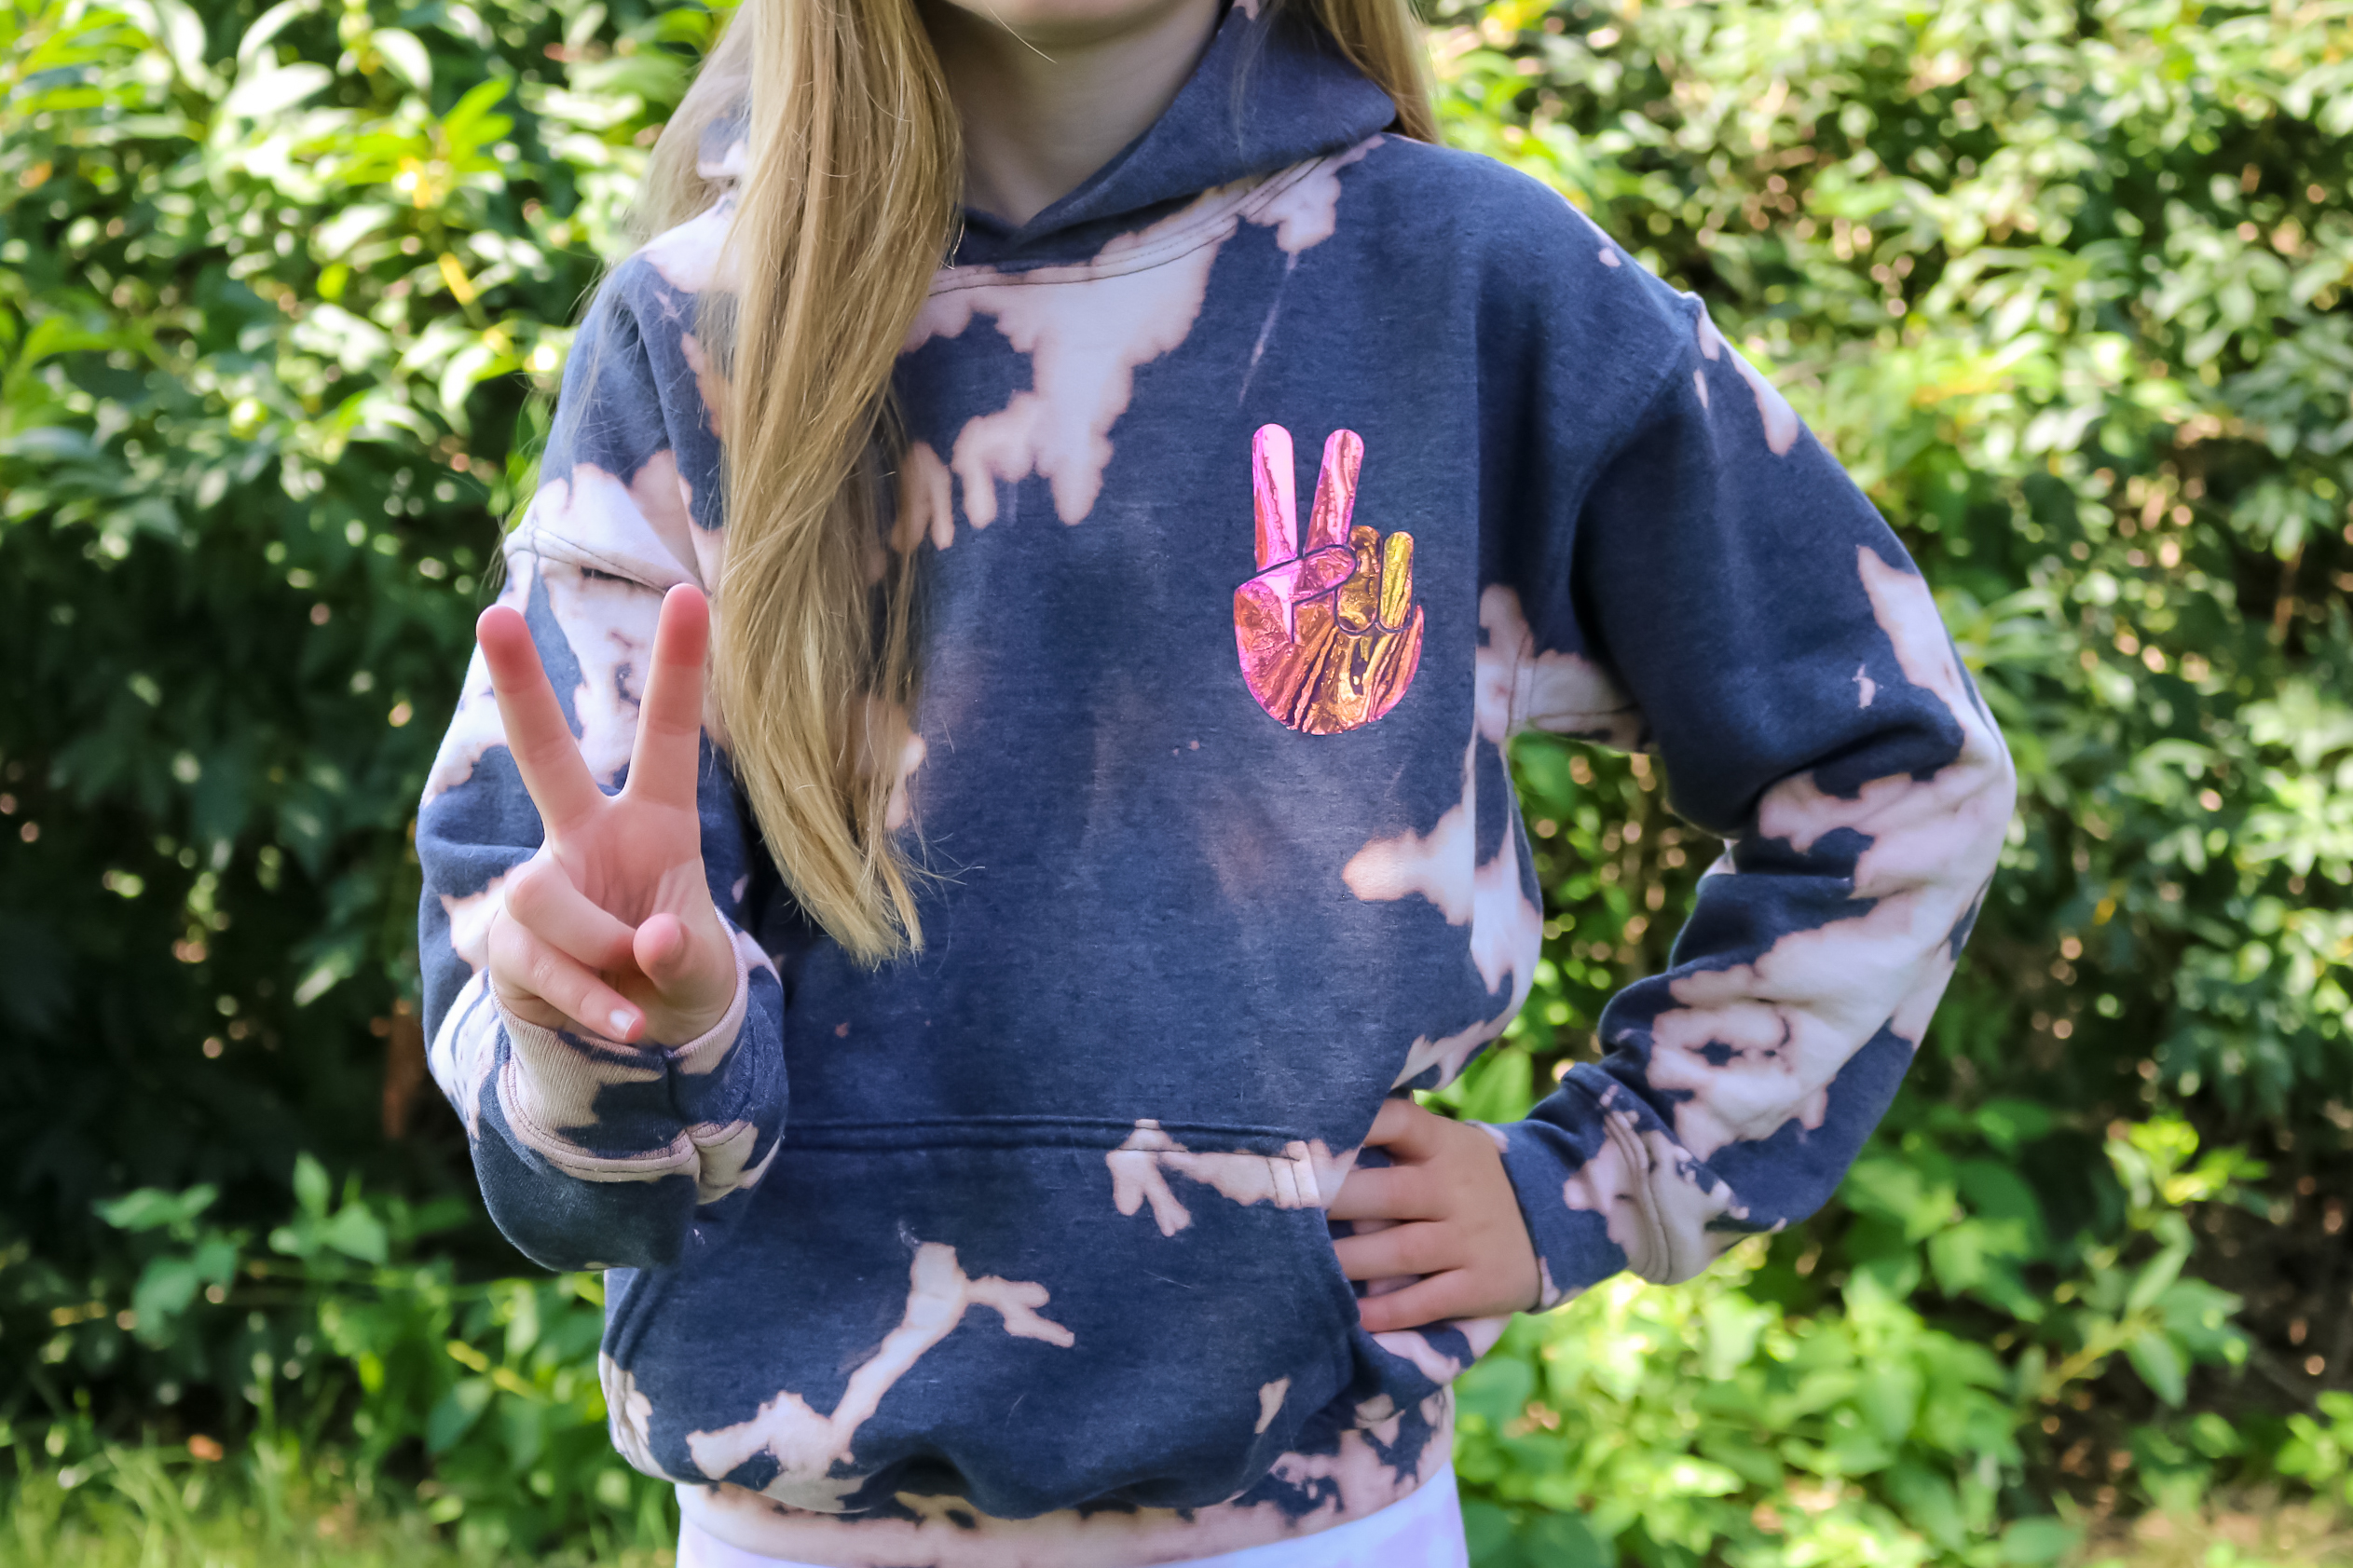 girl wearing bleach dyed sweatshirt and giving the peace sign